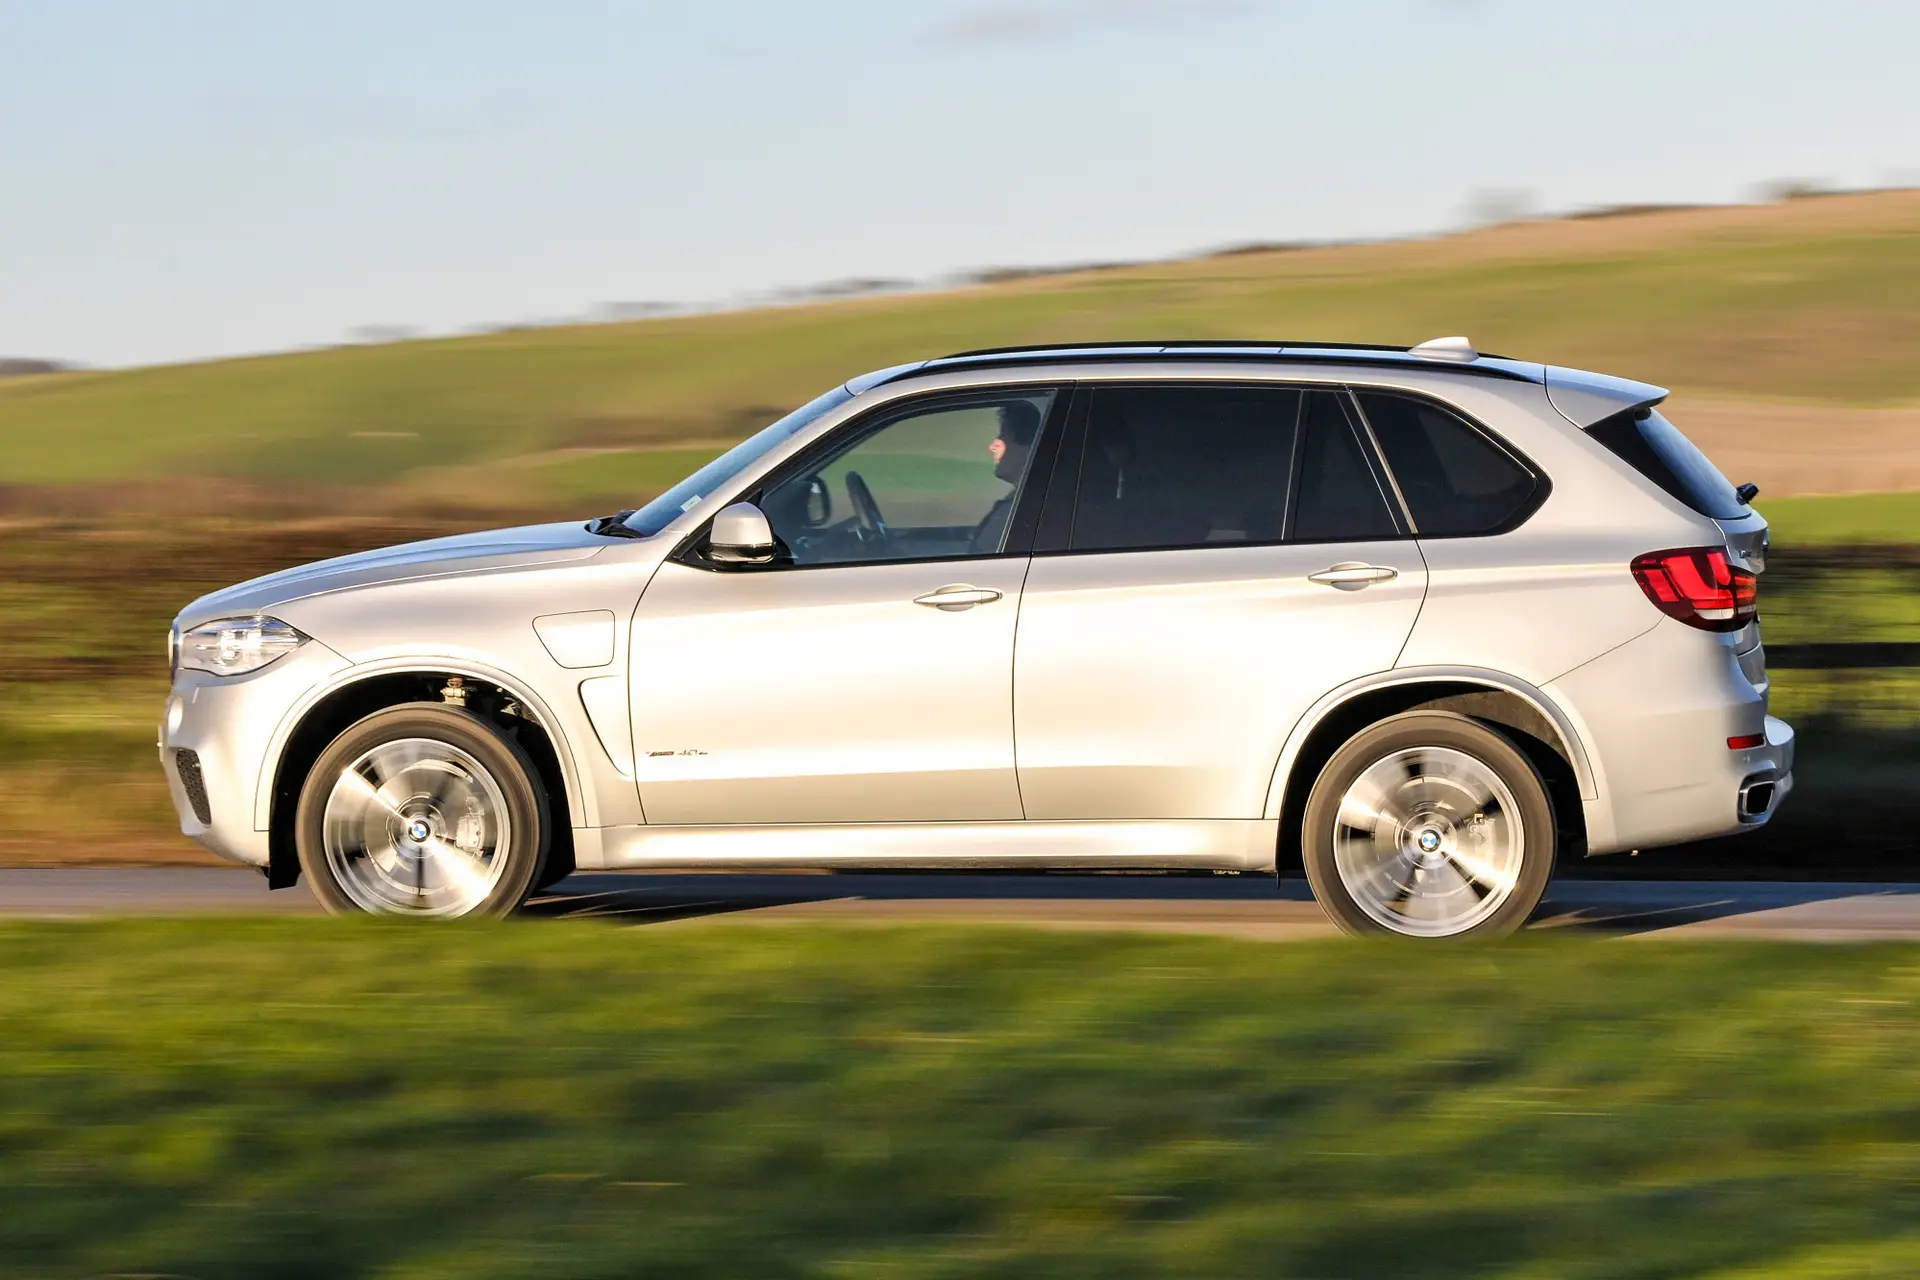 BMW X5 (2014-2018) Review:  Exterior side photo of the BMW X5 on the road